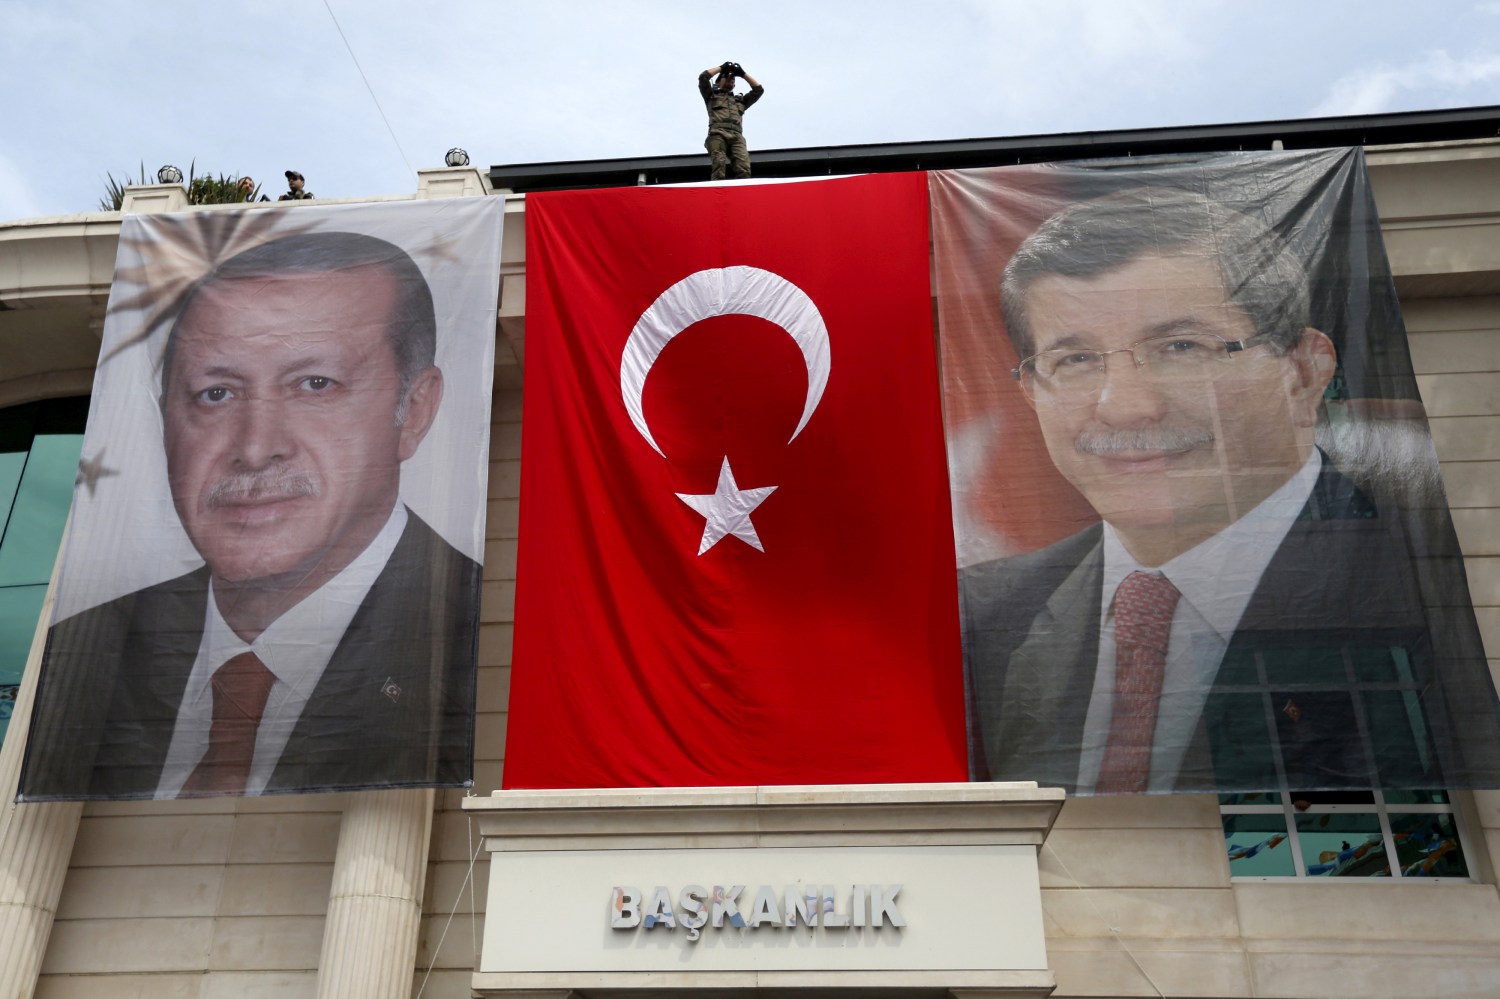 A special forces police officer takes security measures as he stands on top of a building where the portraits of Turkey's President Tayyip Erdogan (L), Prime Minister Ahmet Davutoglu and a Turkish flag are displayed in Istanbul, Turkey, June 3, 2015. REUTERS/Murad Sezer/File Photo - RTX2CSBG